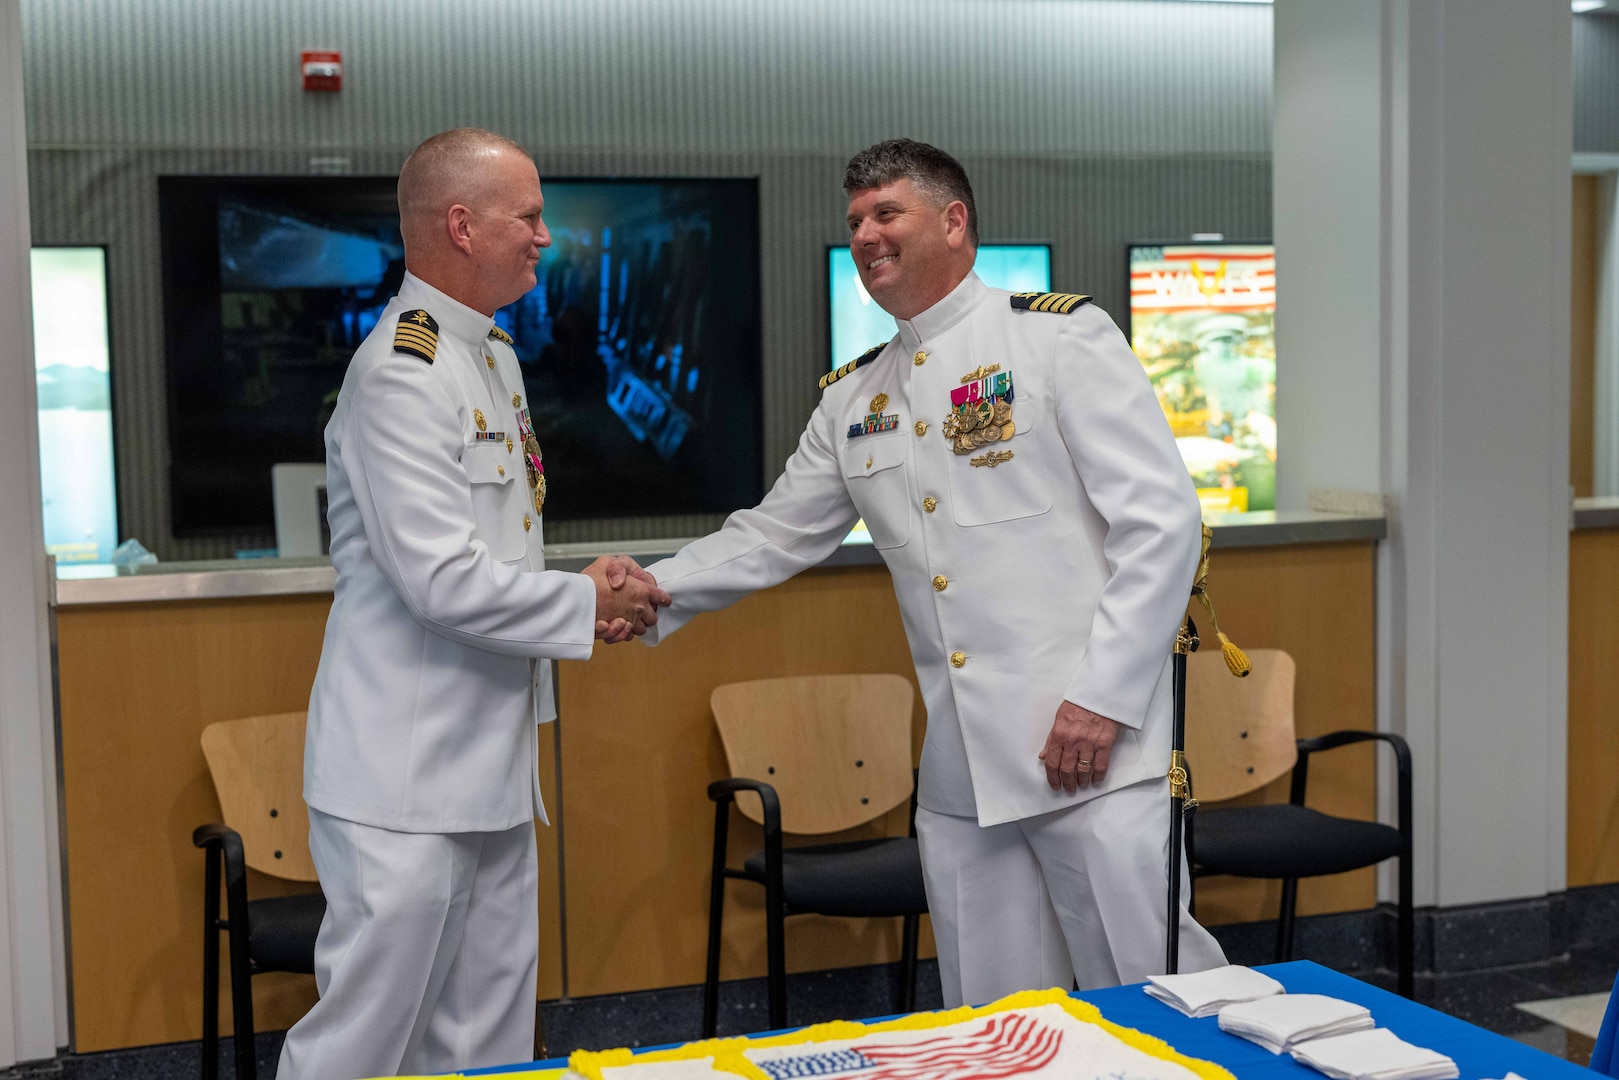 Naval Surface Warfare Center, Carderock Division holds a change of command on May 12, 2023, in Bethesda, Md., where Capt. Matthew Tardy relieved Capt. Todd E. Hutchison as commanding officer after three years of service to Carderock. (U.S. Navy photo by Aaron Thomas)